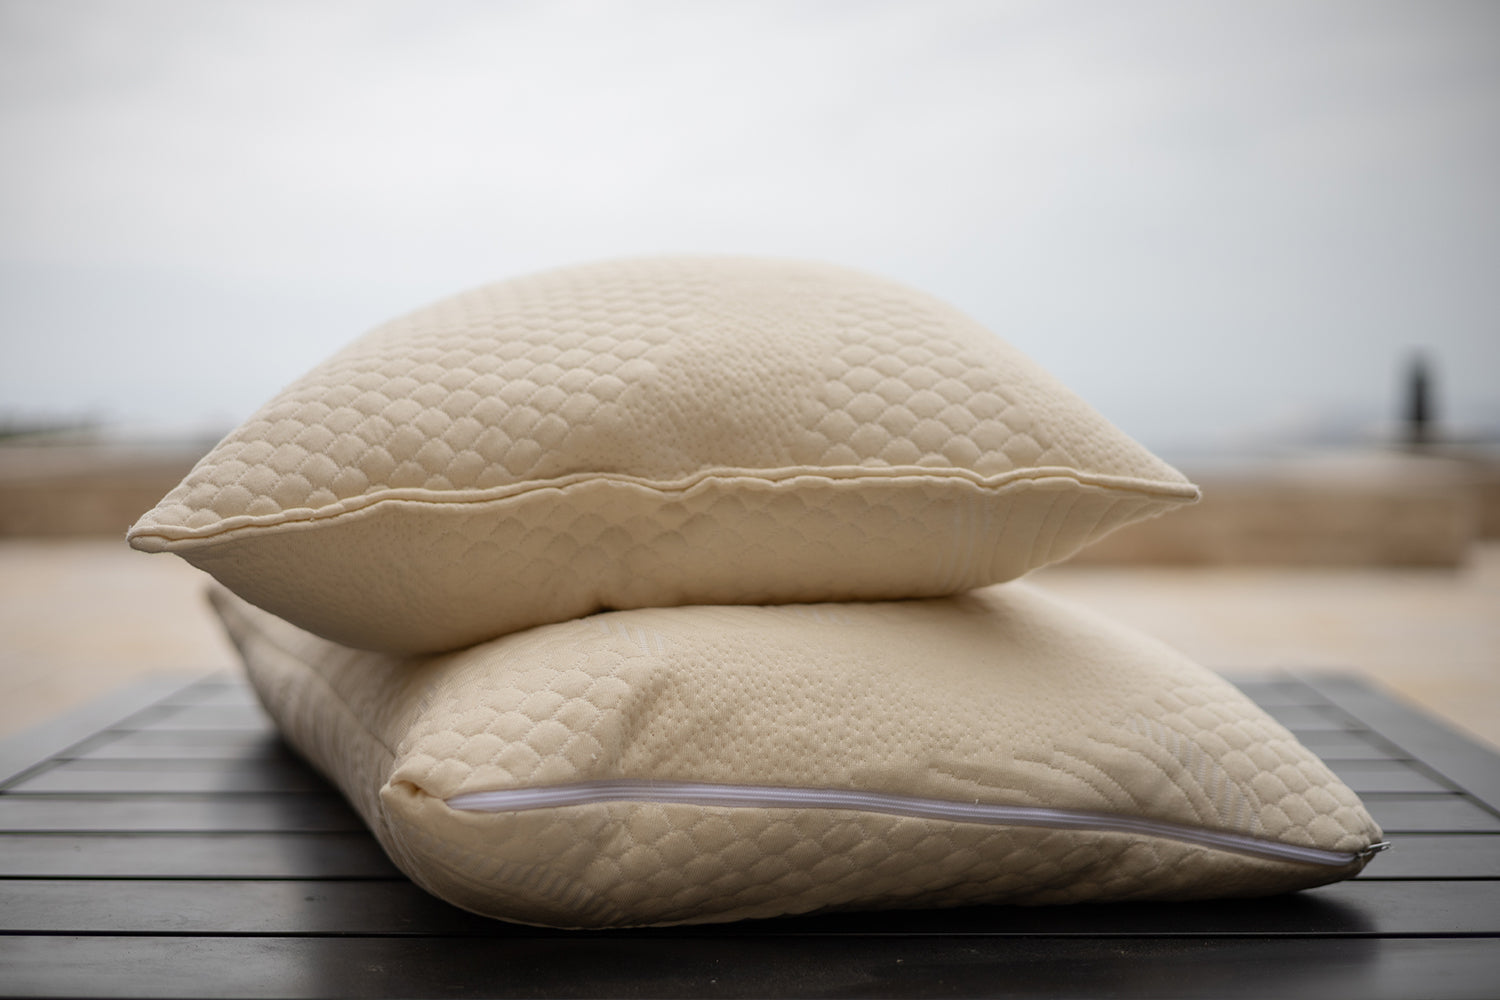 Organic Latex Shredded Pillow [GOLS Certified] with Organic Cotton Cover - Organic Textiles